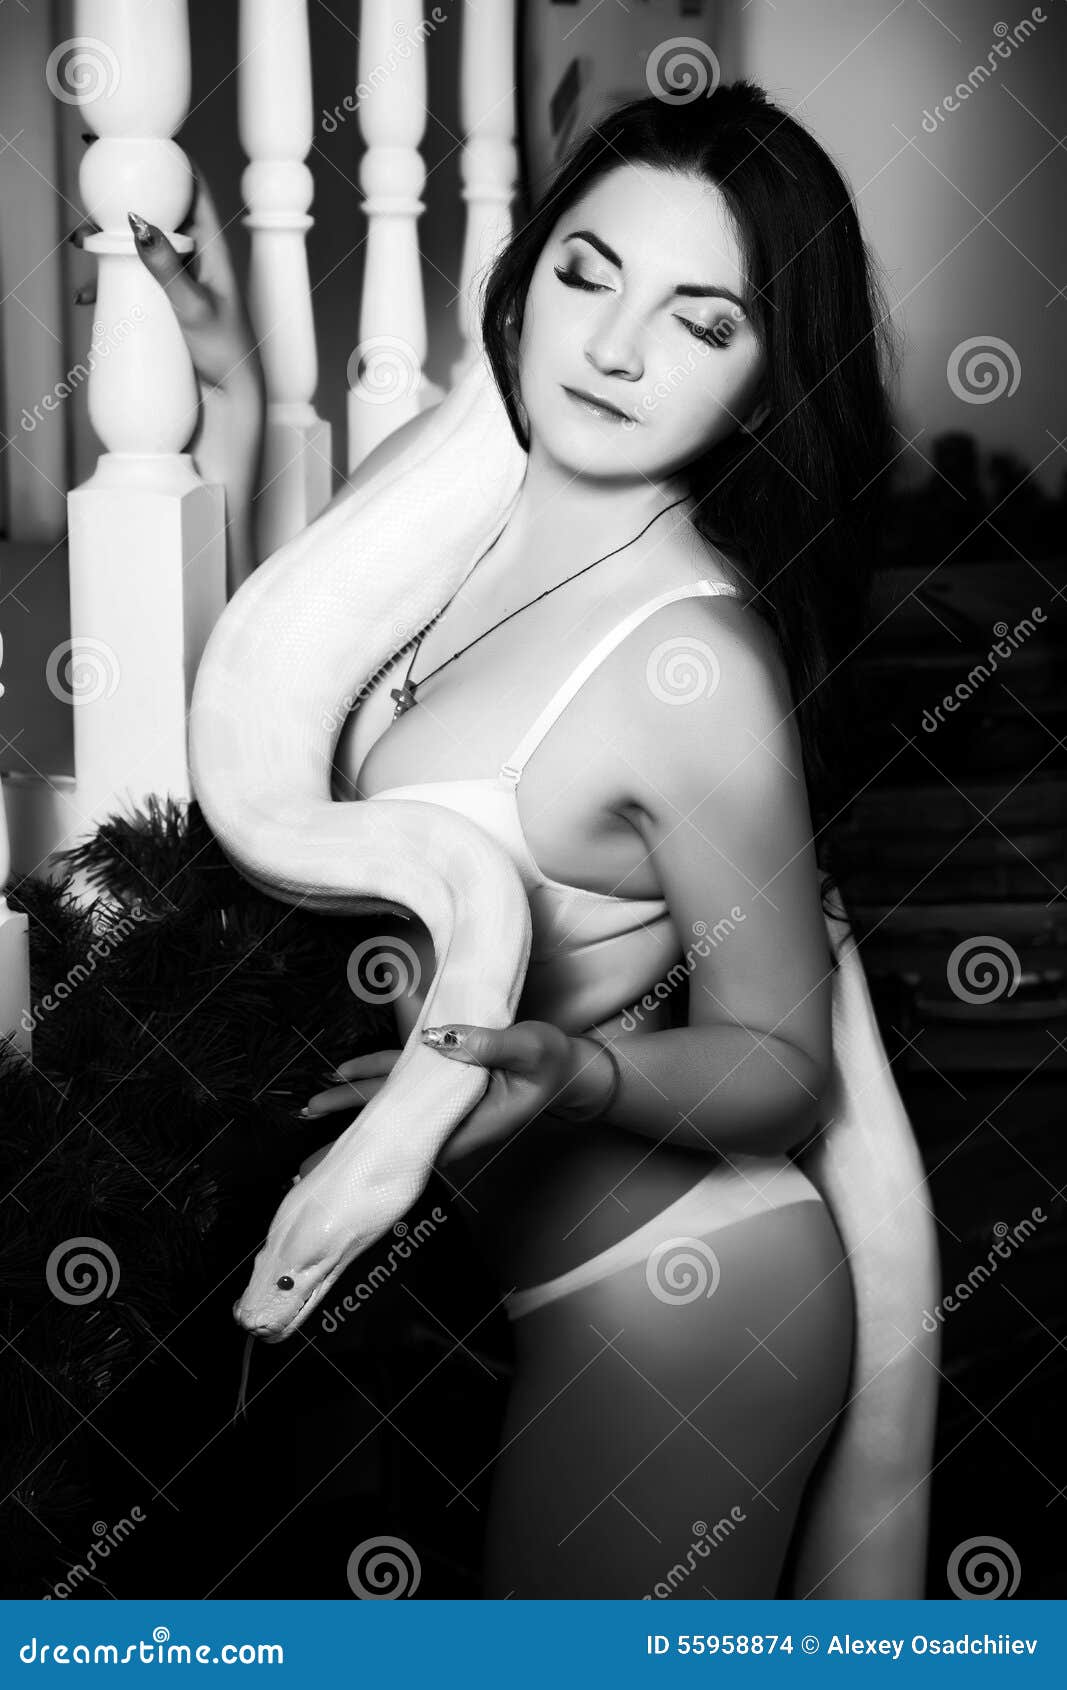 Old white black erotic photo and art You've Got